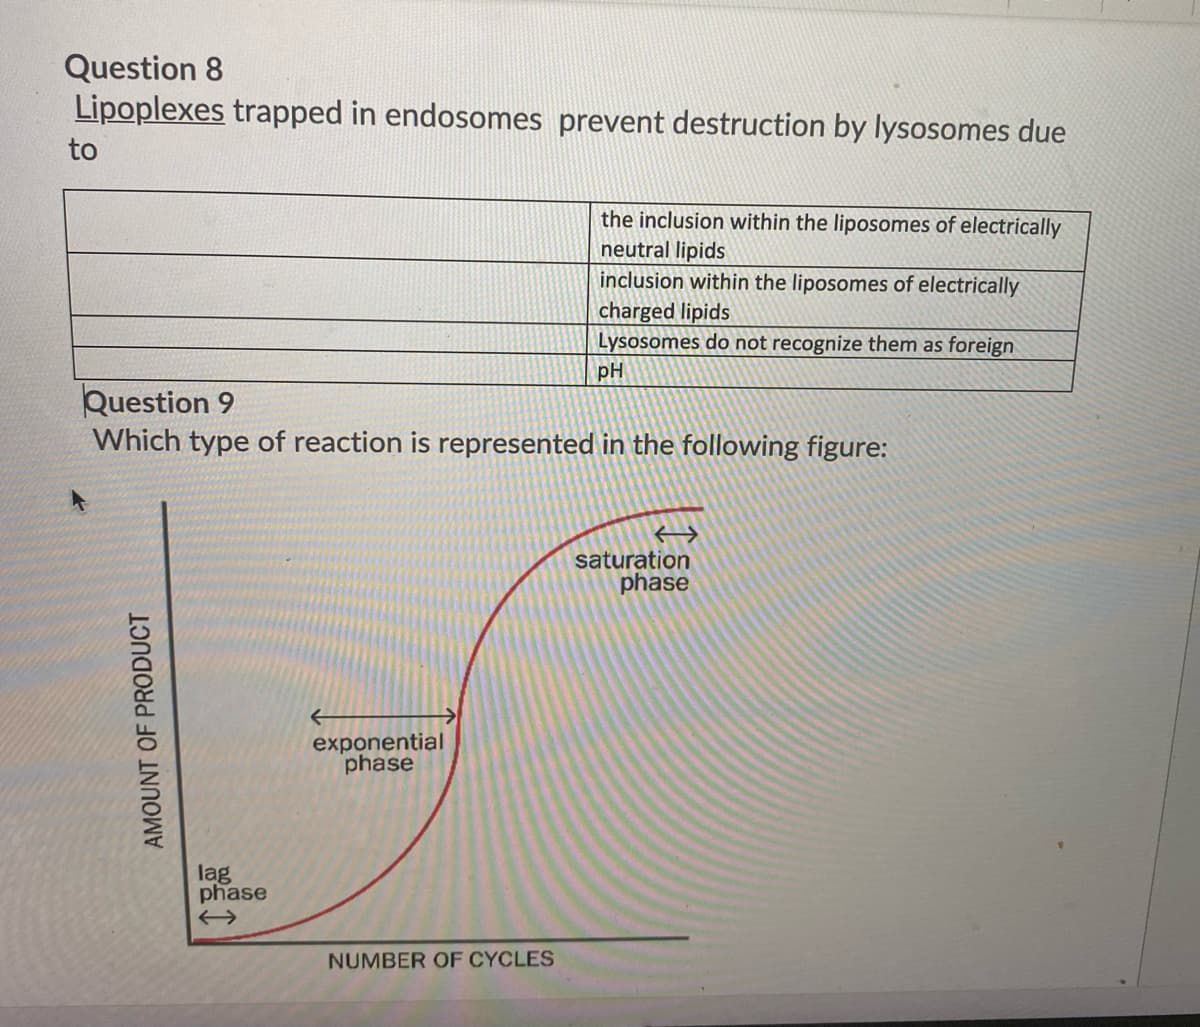 Question 8
Lipoplexes trapped in endosomes prevent destruction by lysosomes due
to
the inclusion within the liposomes of electrically
neutral lipids
inclusion within the liposomes of electrically
charged lipids
Lysosomes do not recognize them as foreign
pH
Question 9
Which type of reaction is represented in the following figure:
saturation
phase
exponential
phase
lag
phase
NUMBER OF CYCLES
AMOUNT OF PRODUCT
